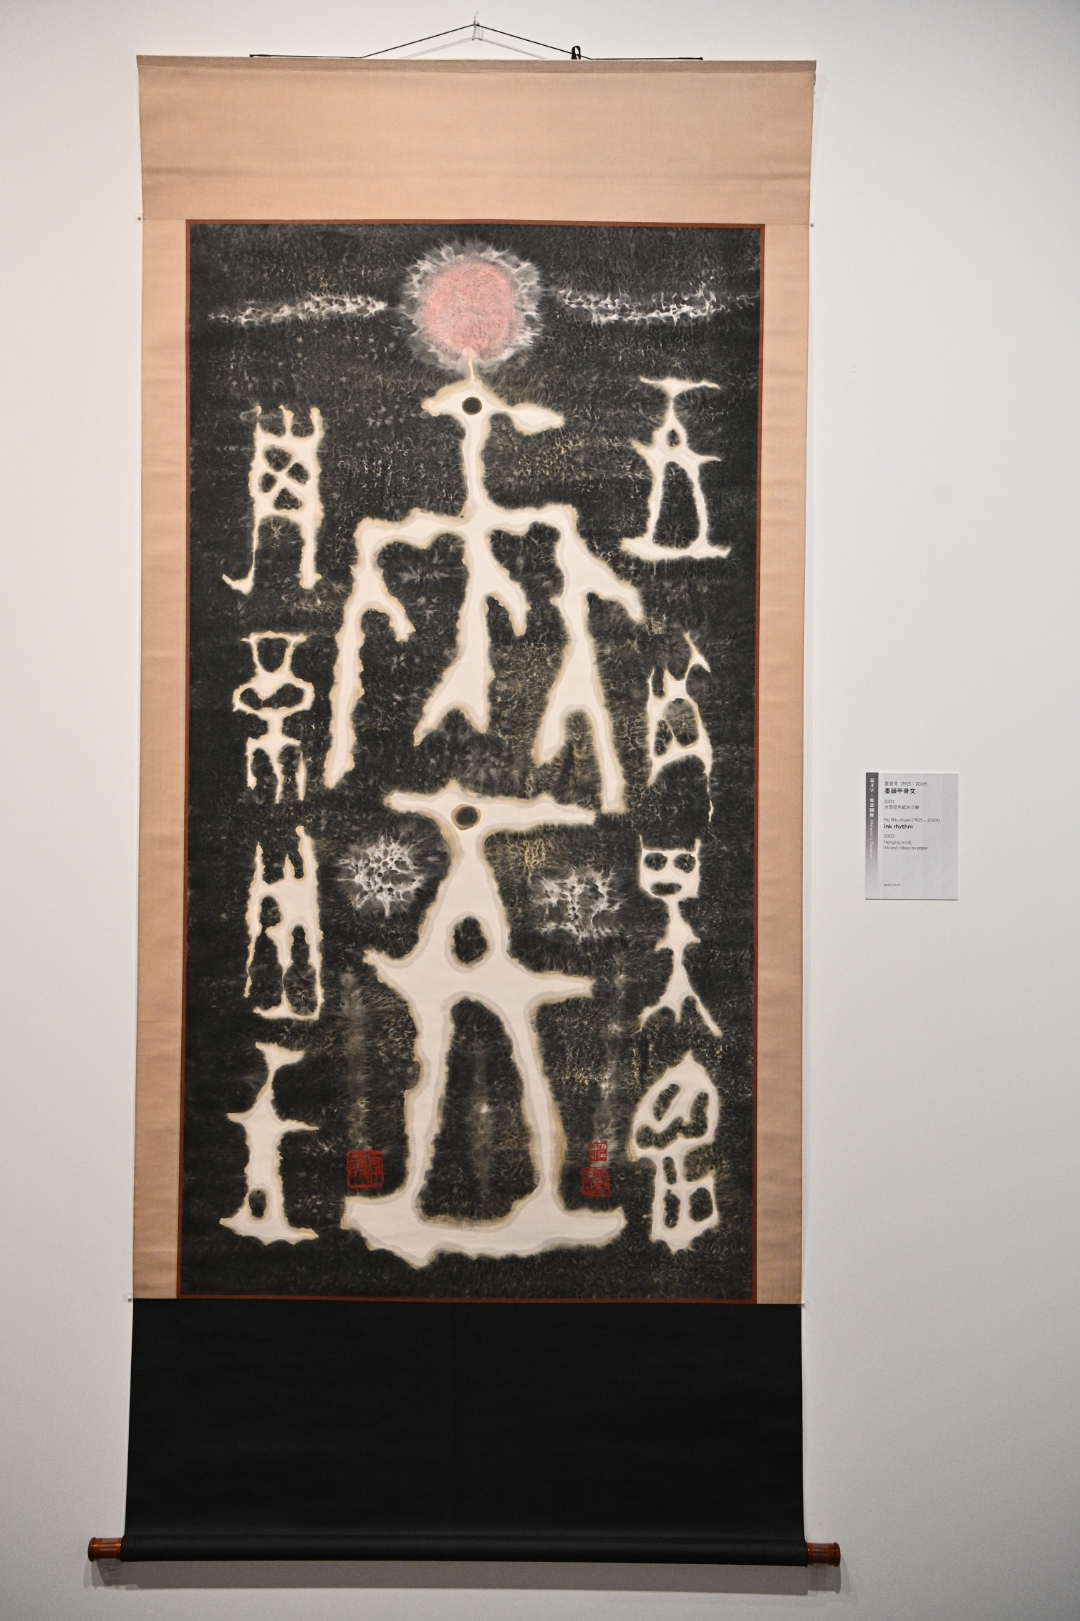 The "City Rhymes: The Melodious Notes of Calligraphy" exhibition will be held from tomorrow (July 22) at the Hong Kong Museum of Art. Photo shows Ha Bik-chuen's "Ink rhythm".